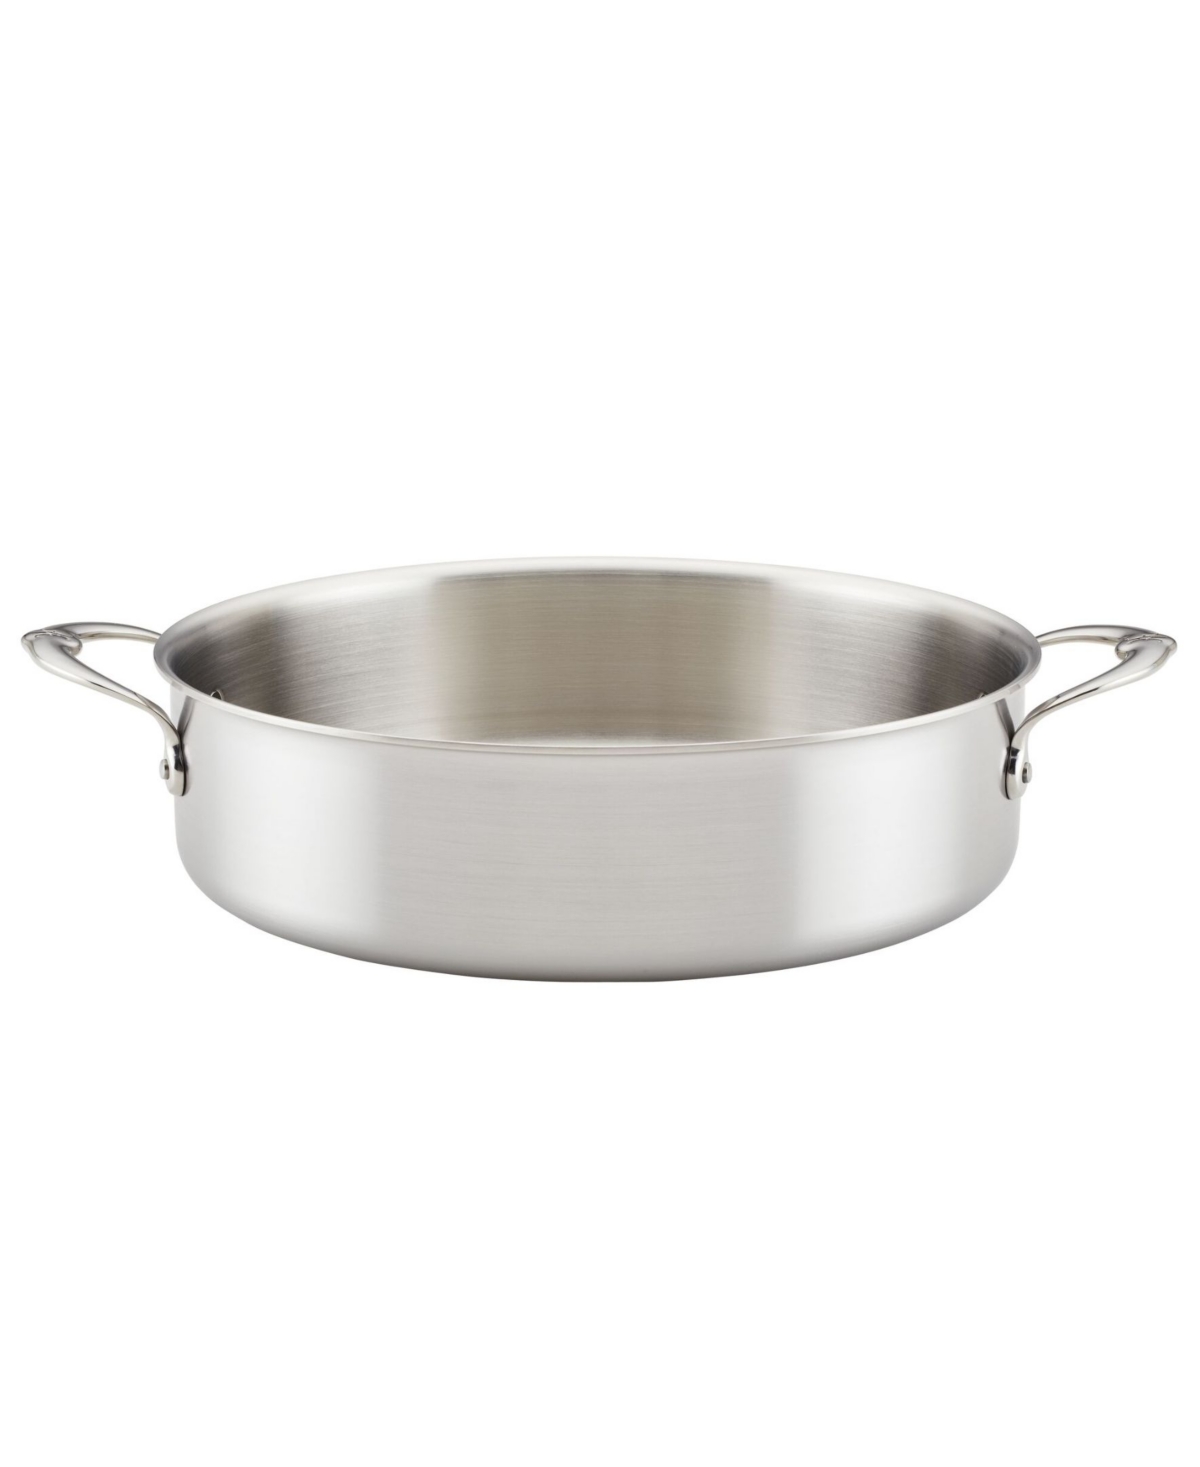 Shop Hestan Thomas Keller Insignia Commercial Clad Stainless Steel 6-quart Open Rondeau In No Color